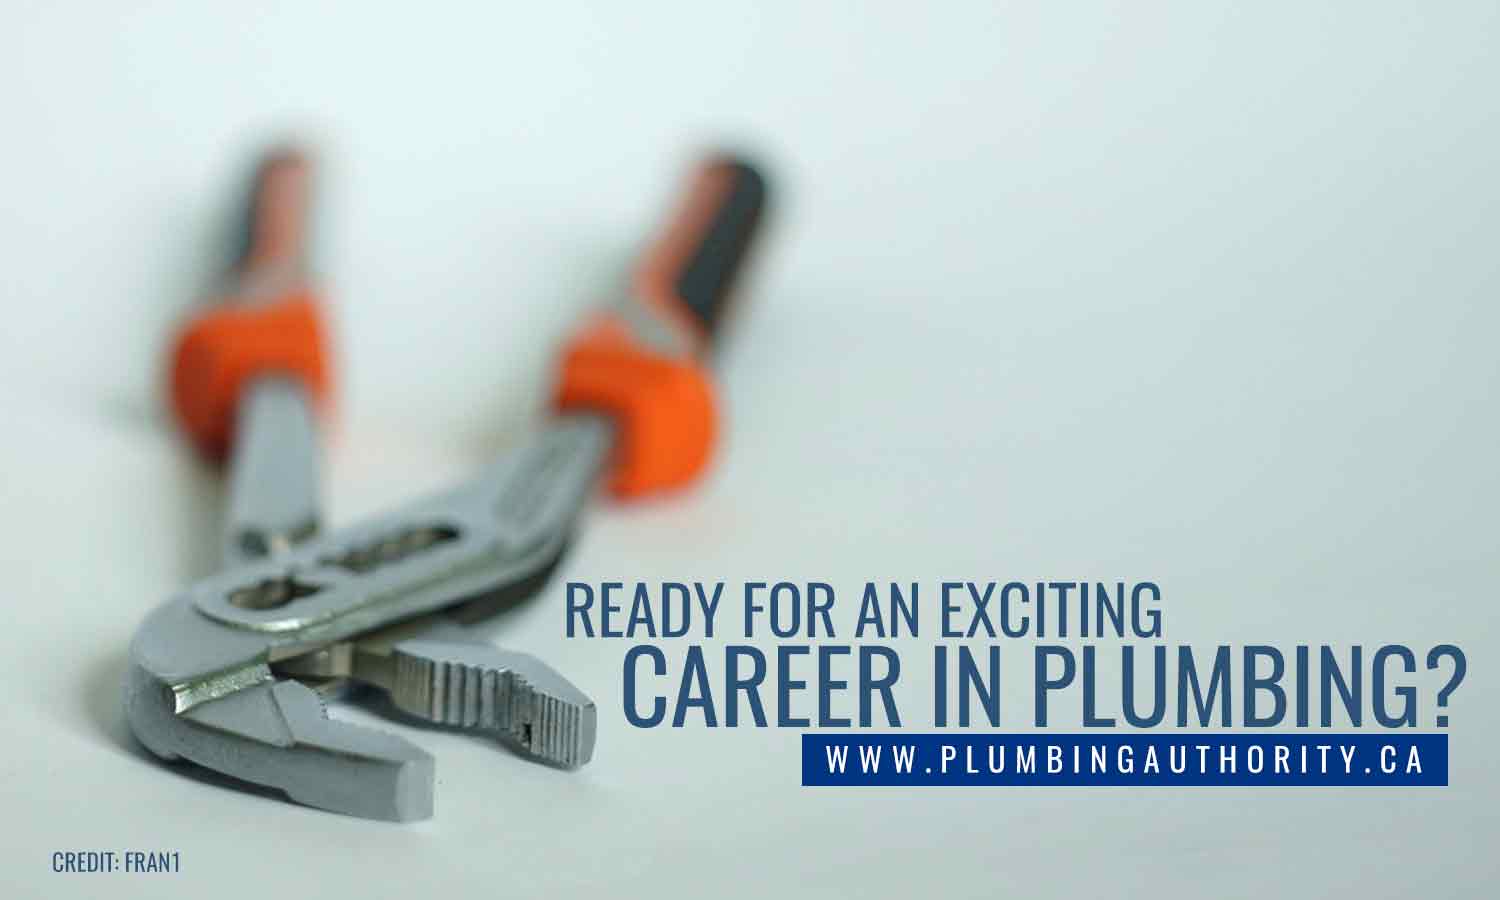 Ready for an exciting career in plumbing?